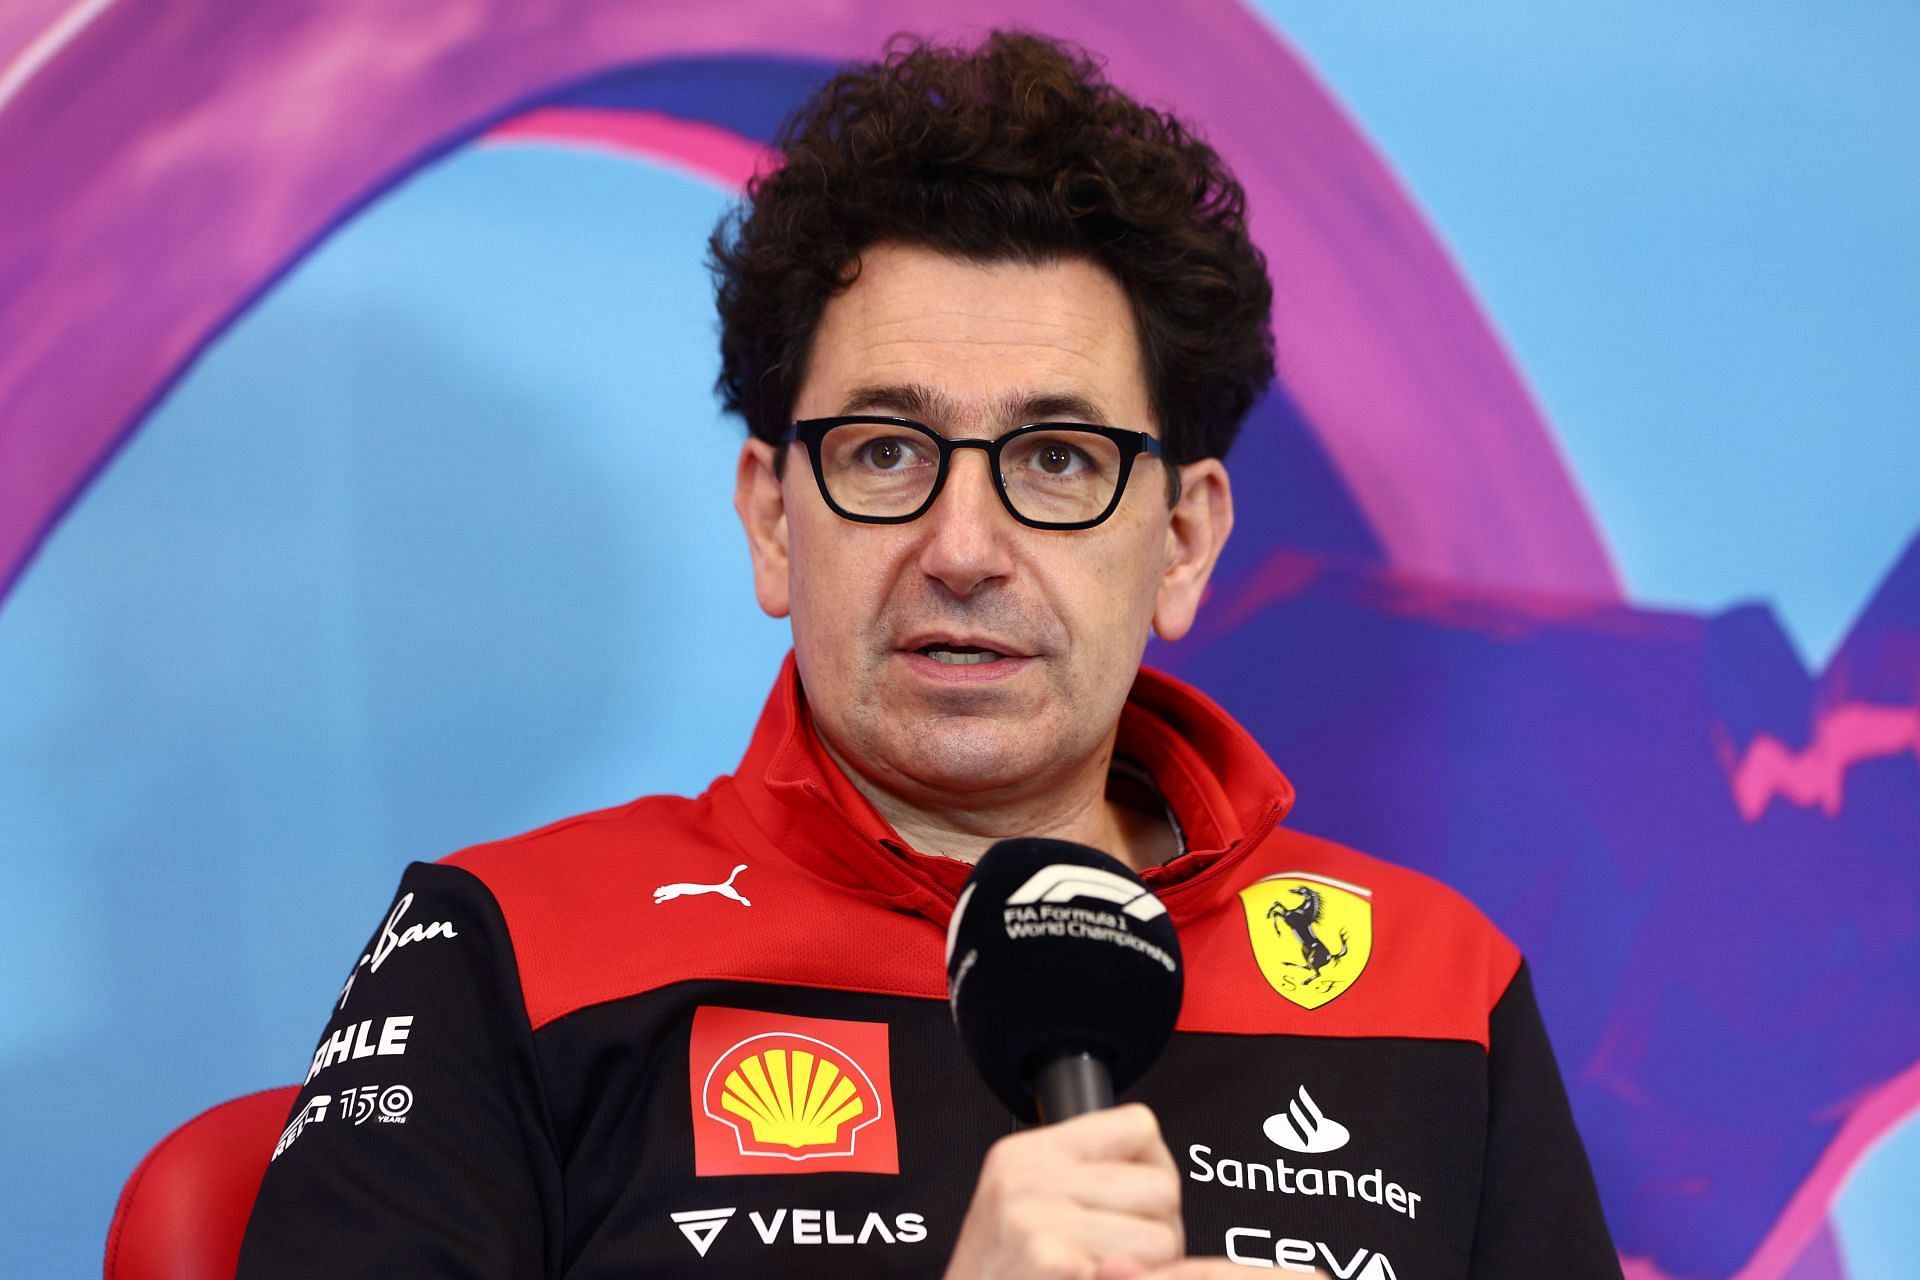 Ferrari team principal Mattia Binotto speaks to the media during the 2022 F1 Austrian GP weekend. (Photo by Clive Rose/Getty Images)